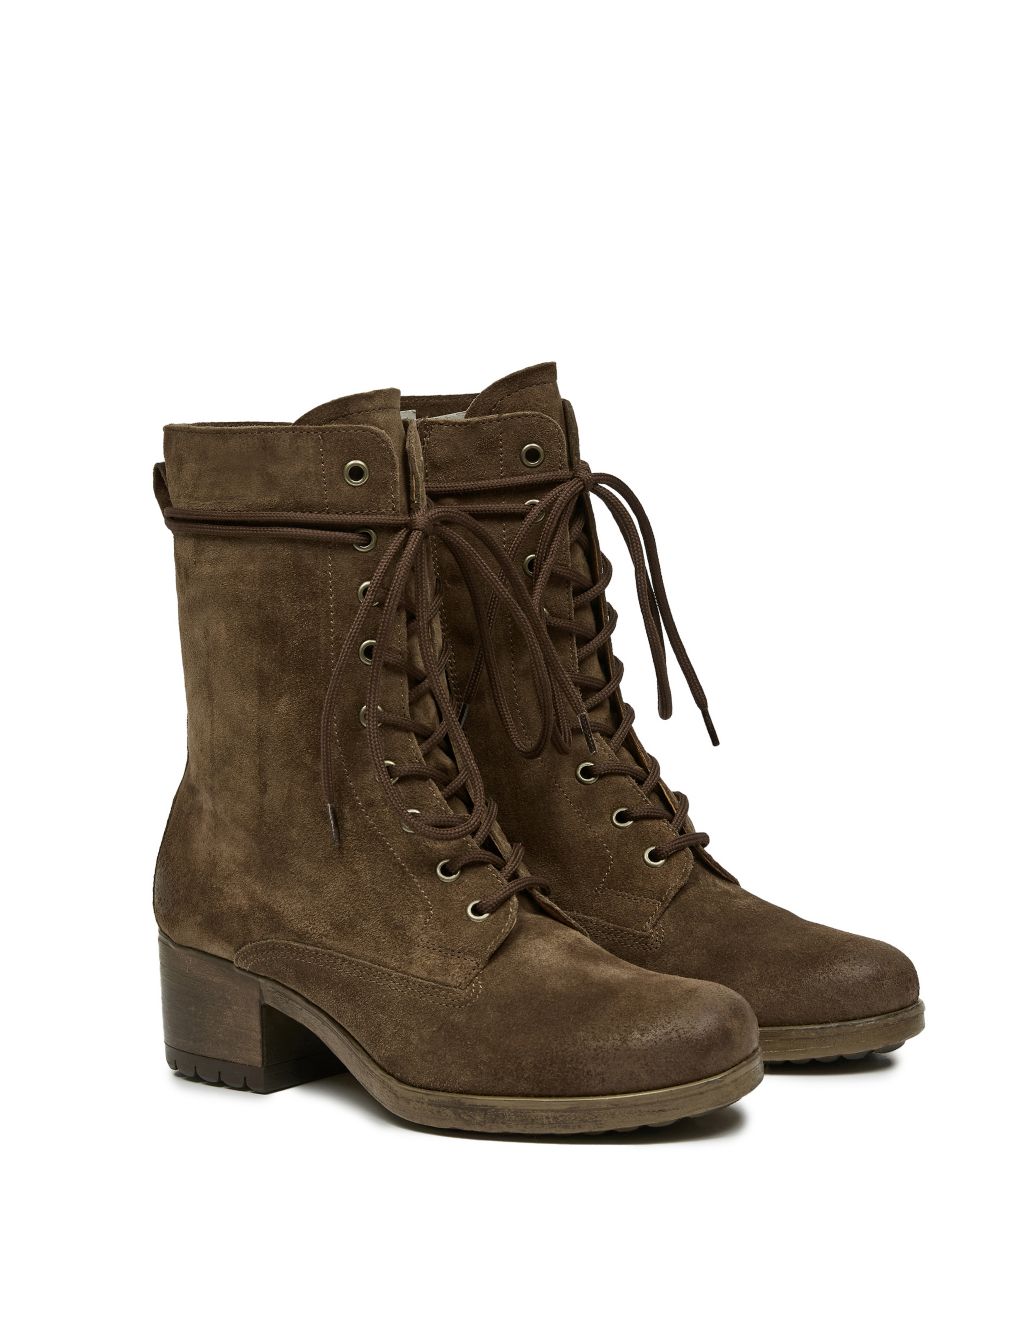 Suede Lace Up Block Heel Ankle Boots image 2